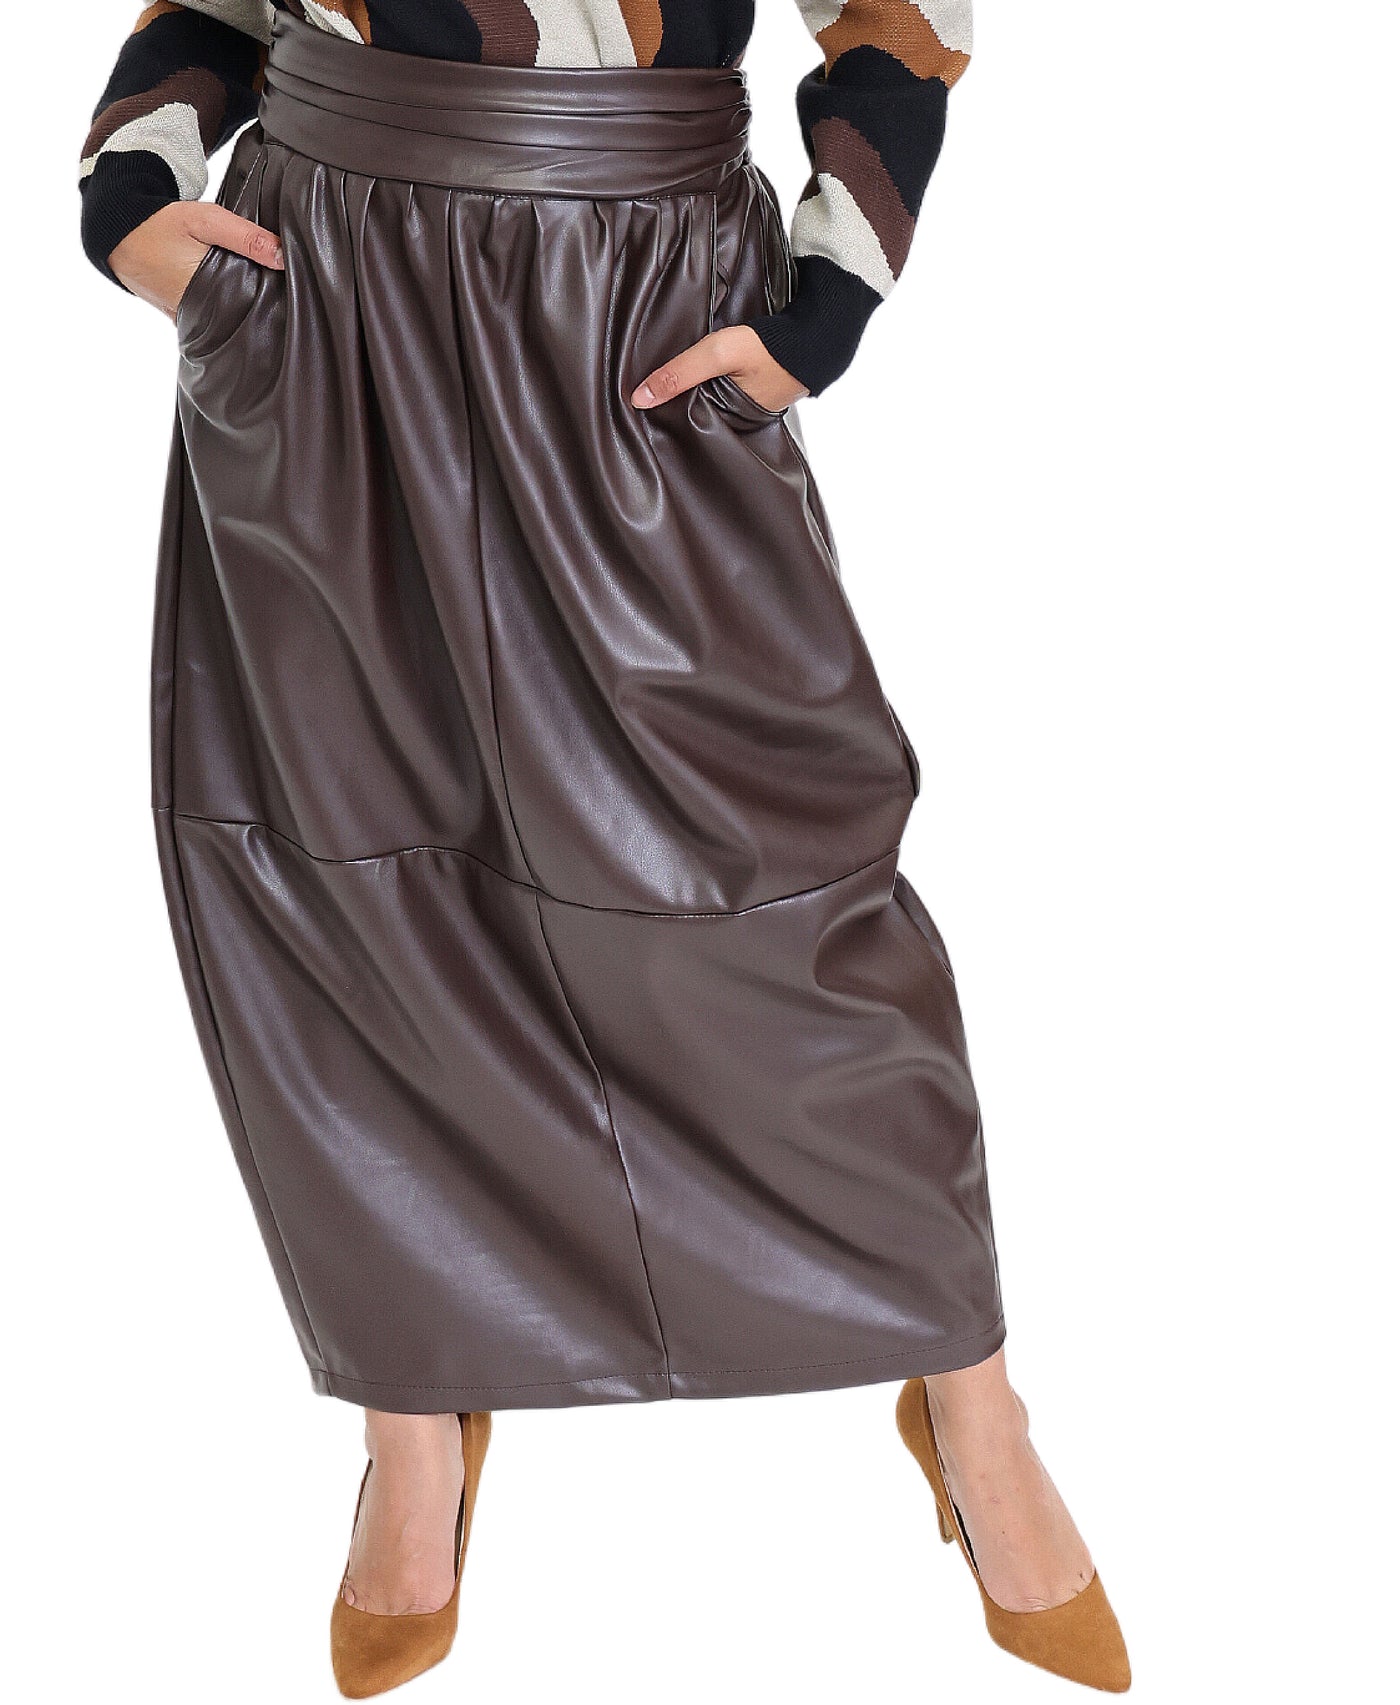 Faux Leather Skirt image 1